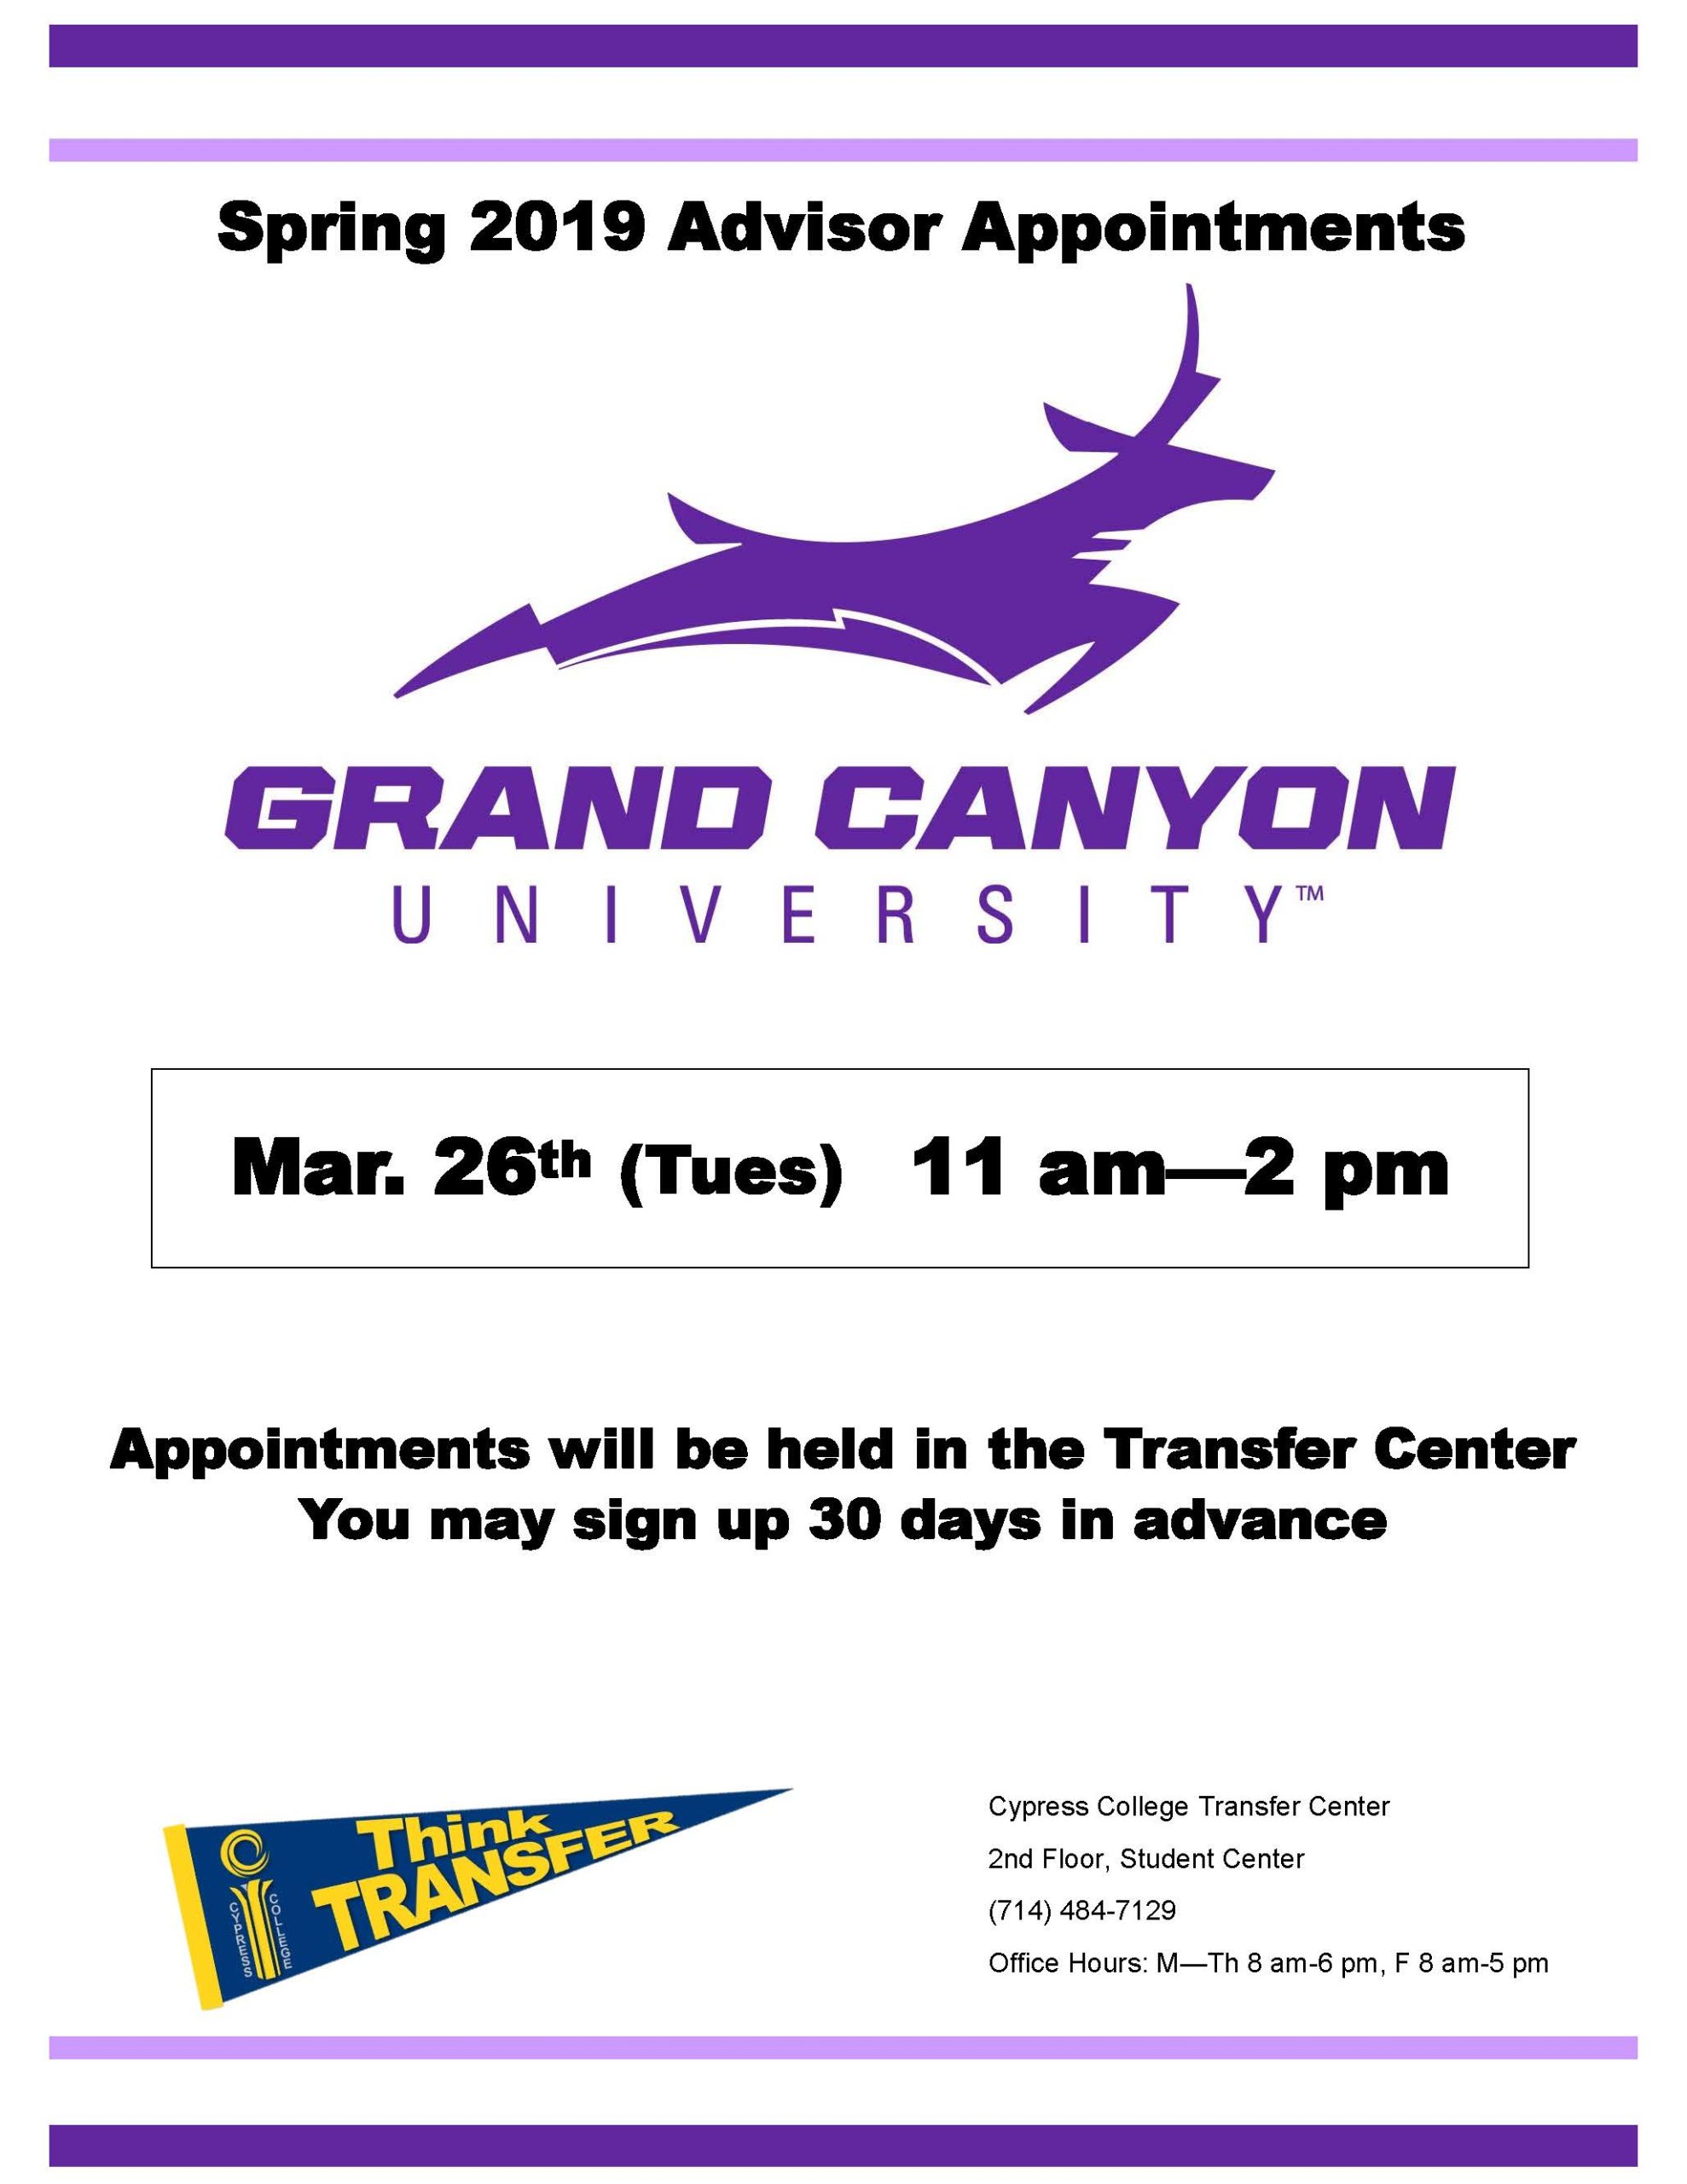 Spring 2019 Advisor Appointments Grand Canyon University flyer